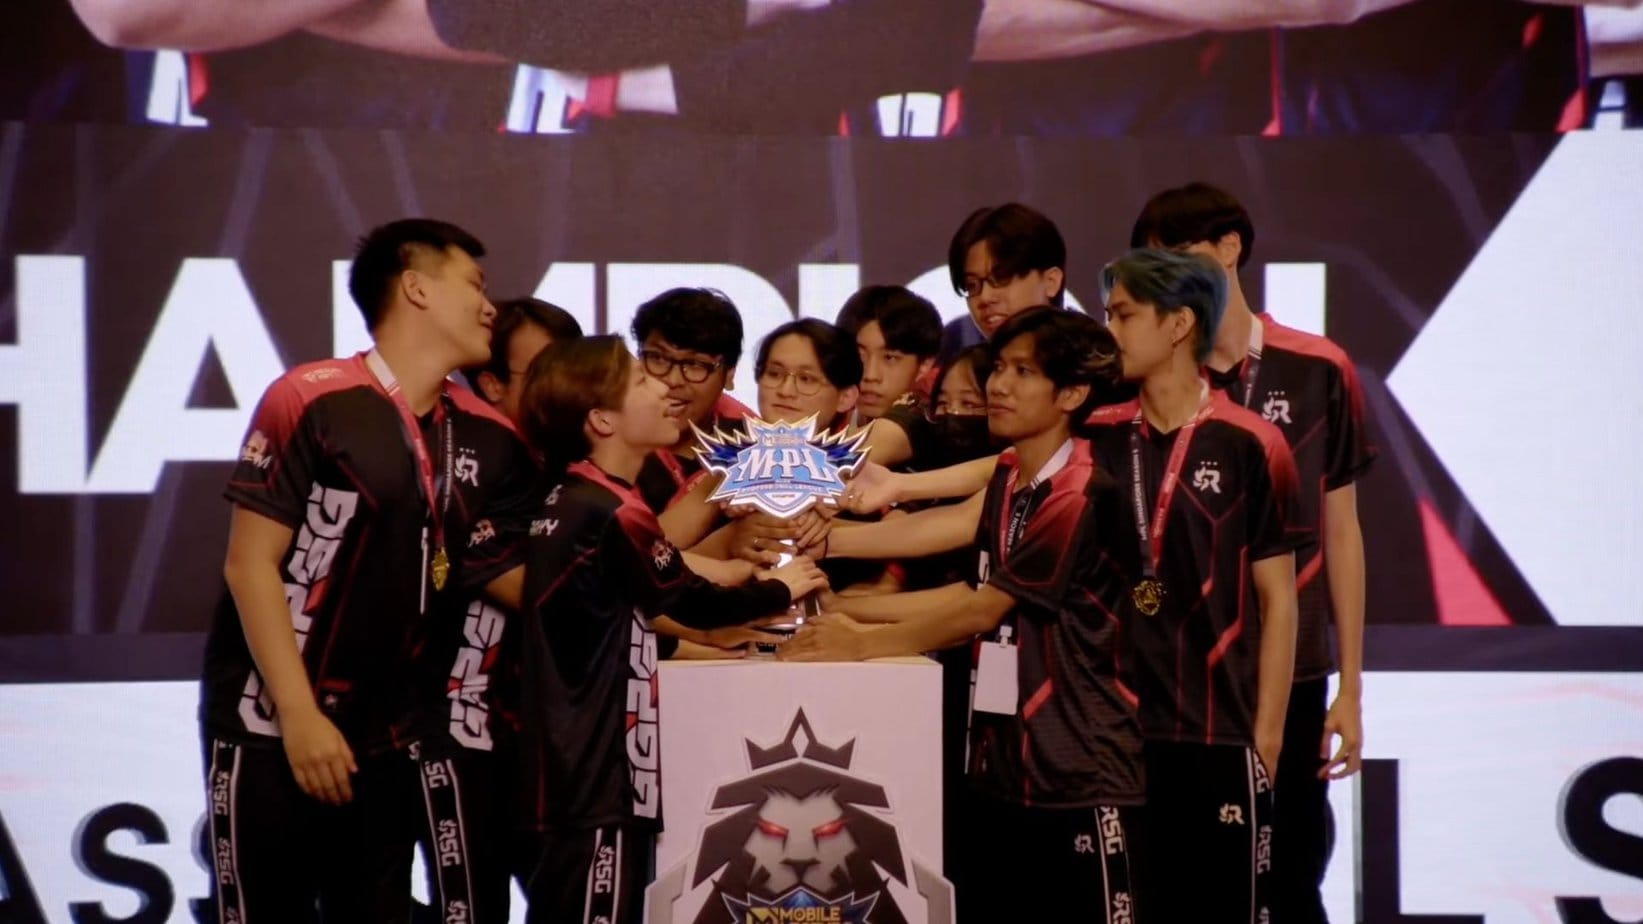 RSG Slate SG defends crown, becomes first team to win three MPL SG titles in a row - ONE Esports